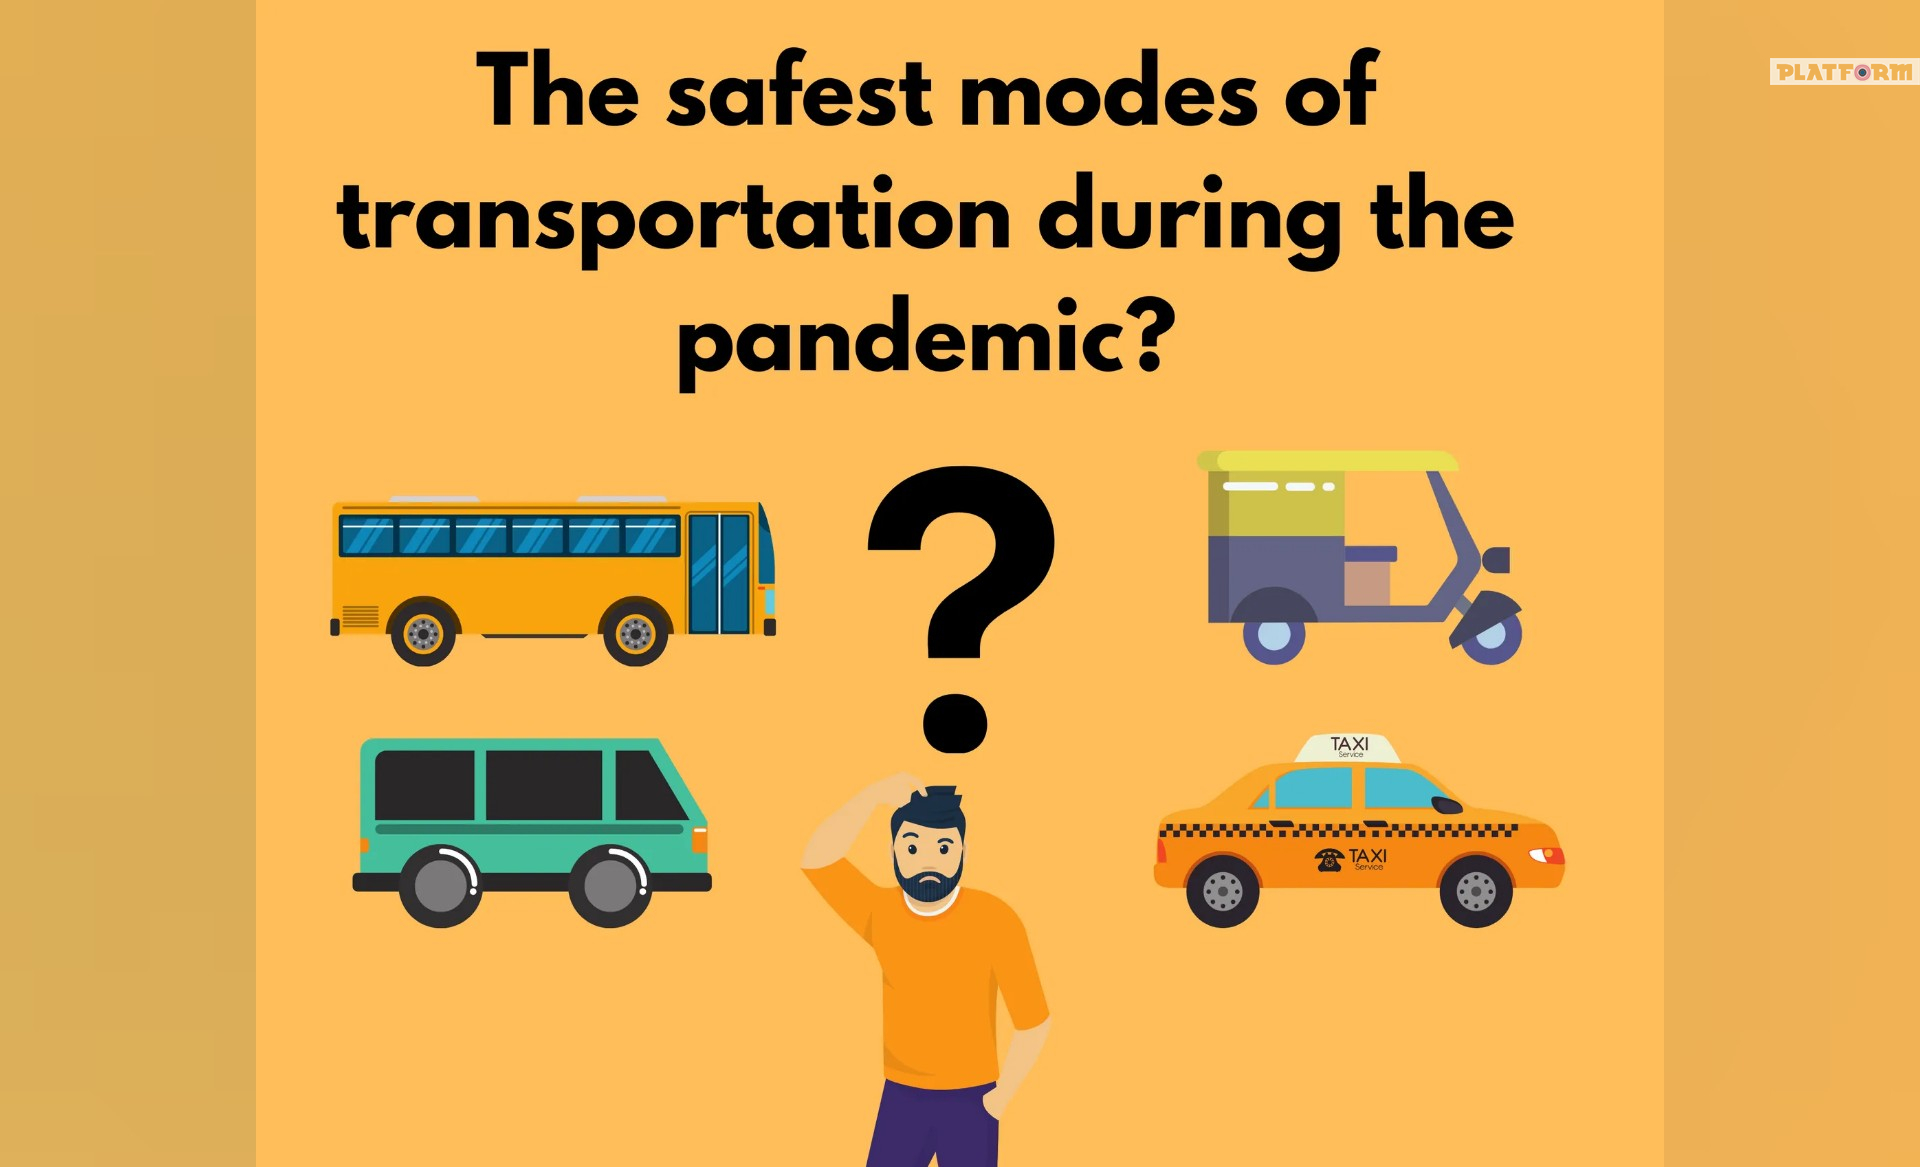 Which form of transportation will be the safest in COVID-19 era?